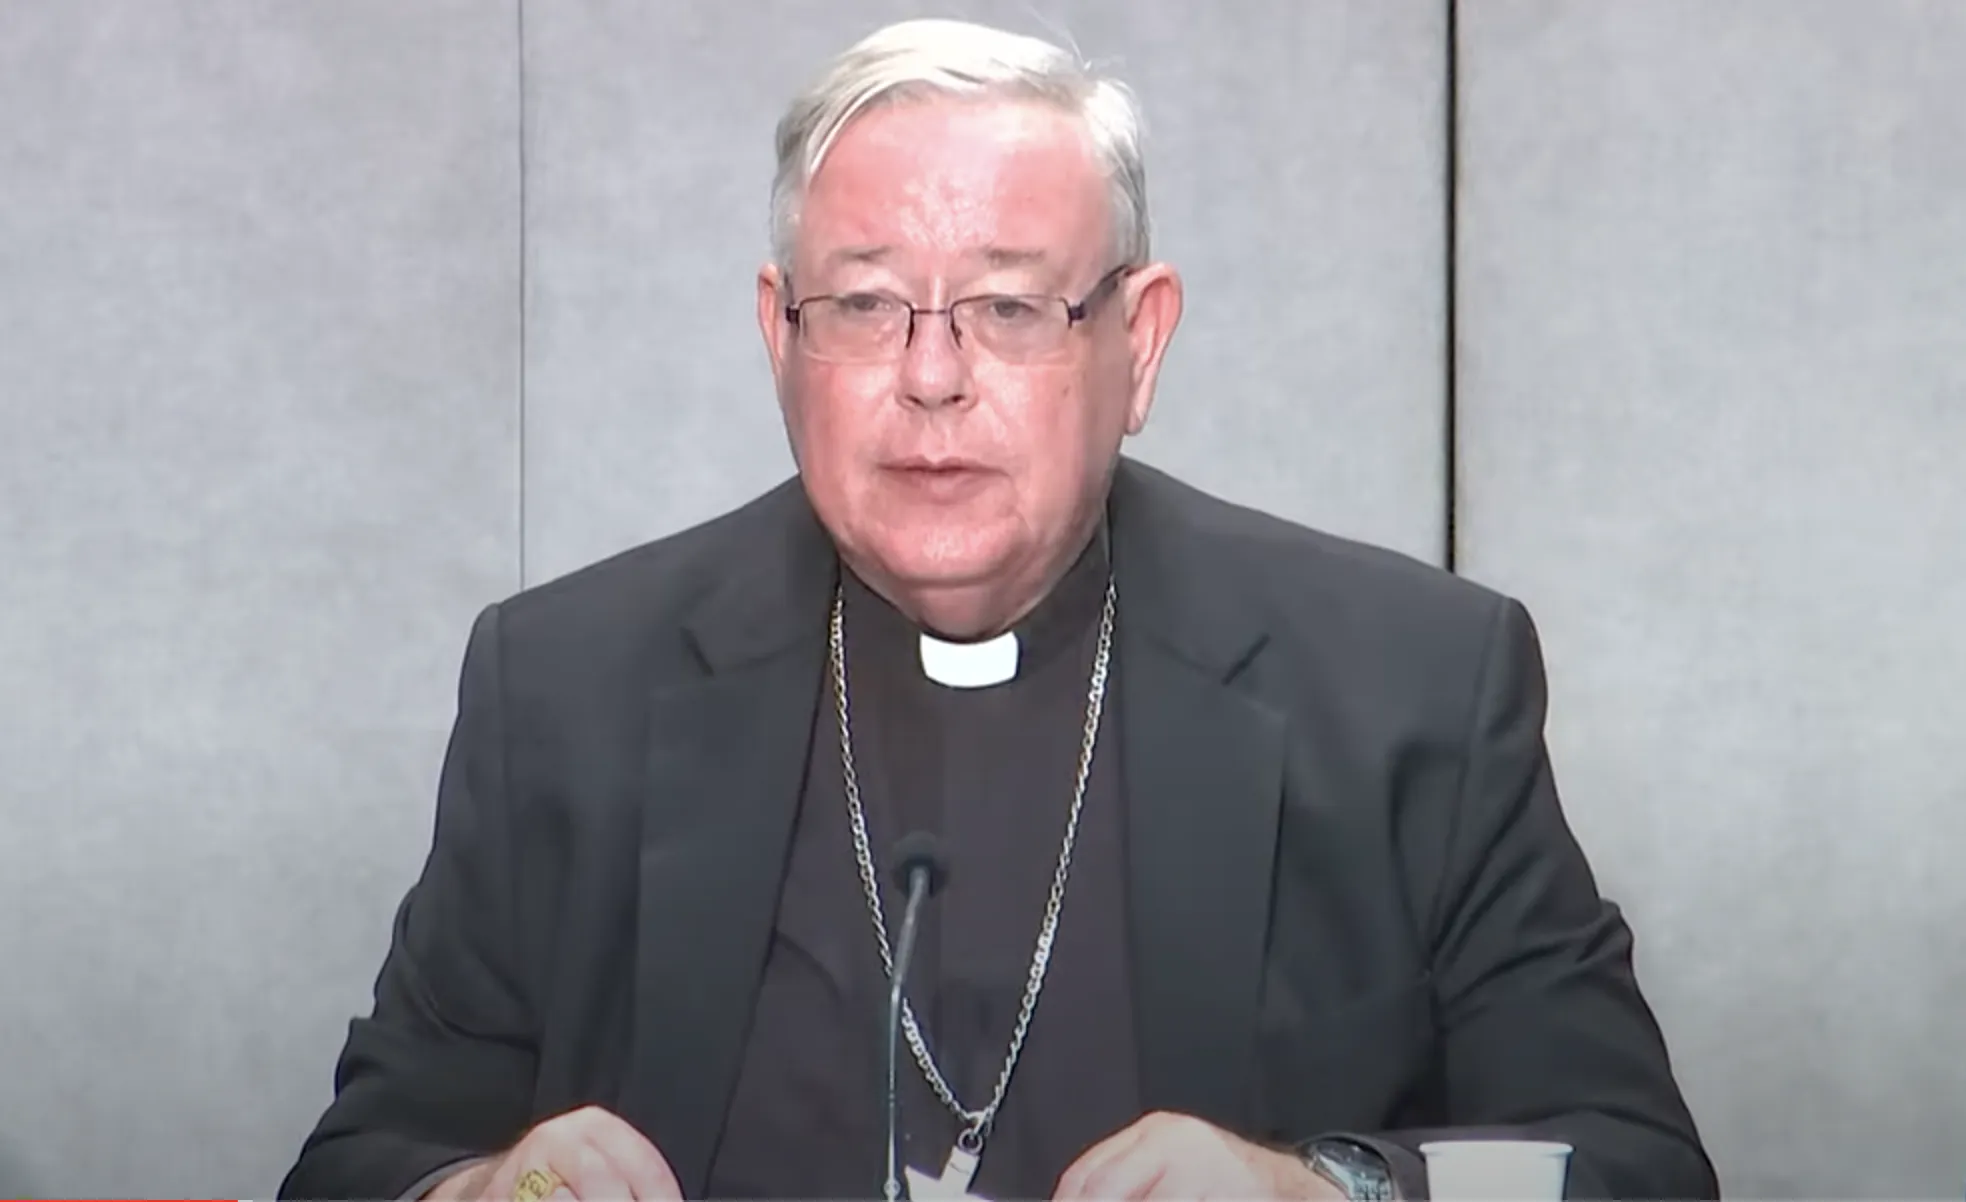 Cardinal Jean-Claude Hollerich, S.J., speaking at the press conference in the Vatican on Aug. 26, 2022.?w=200&h=150